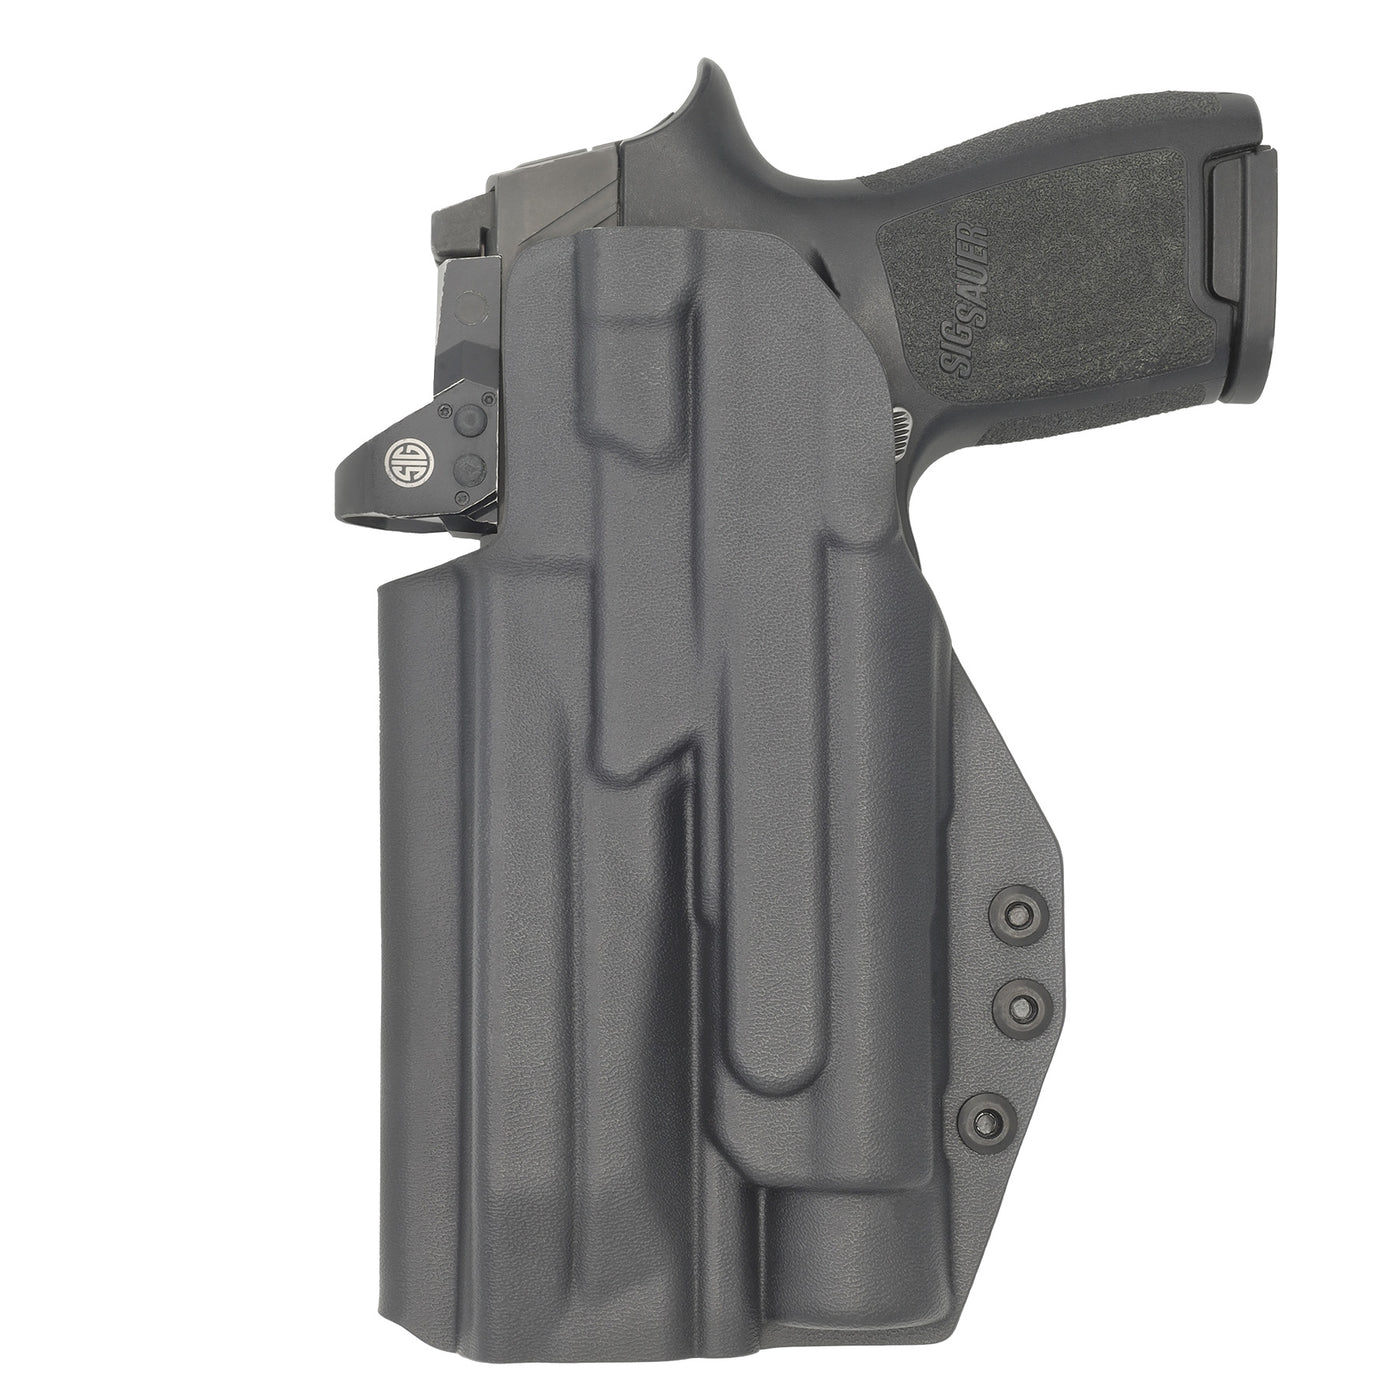 C&G Holsters quickship IWB Tactical Springfield XD-M Elite Streamlight TLR1 in holstered position back view